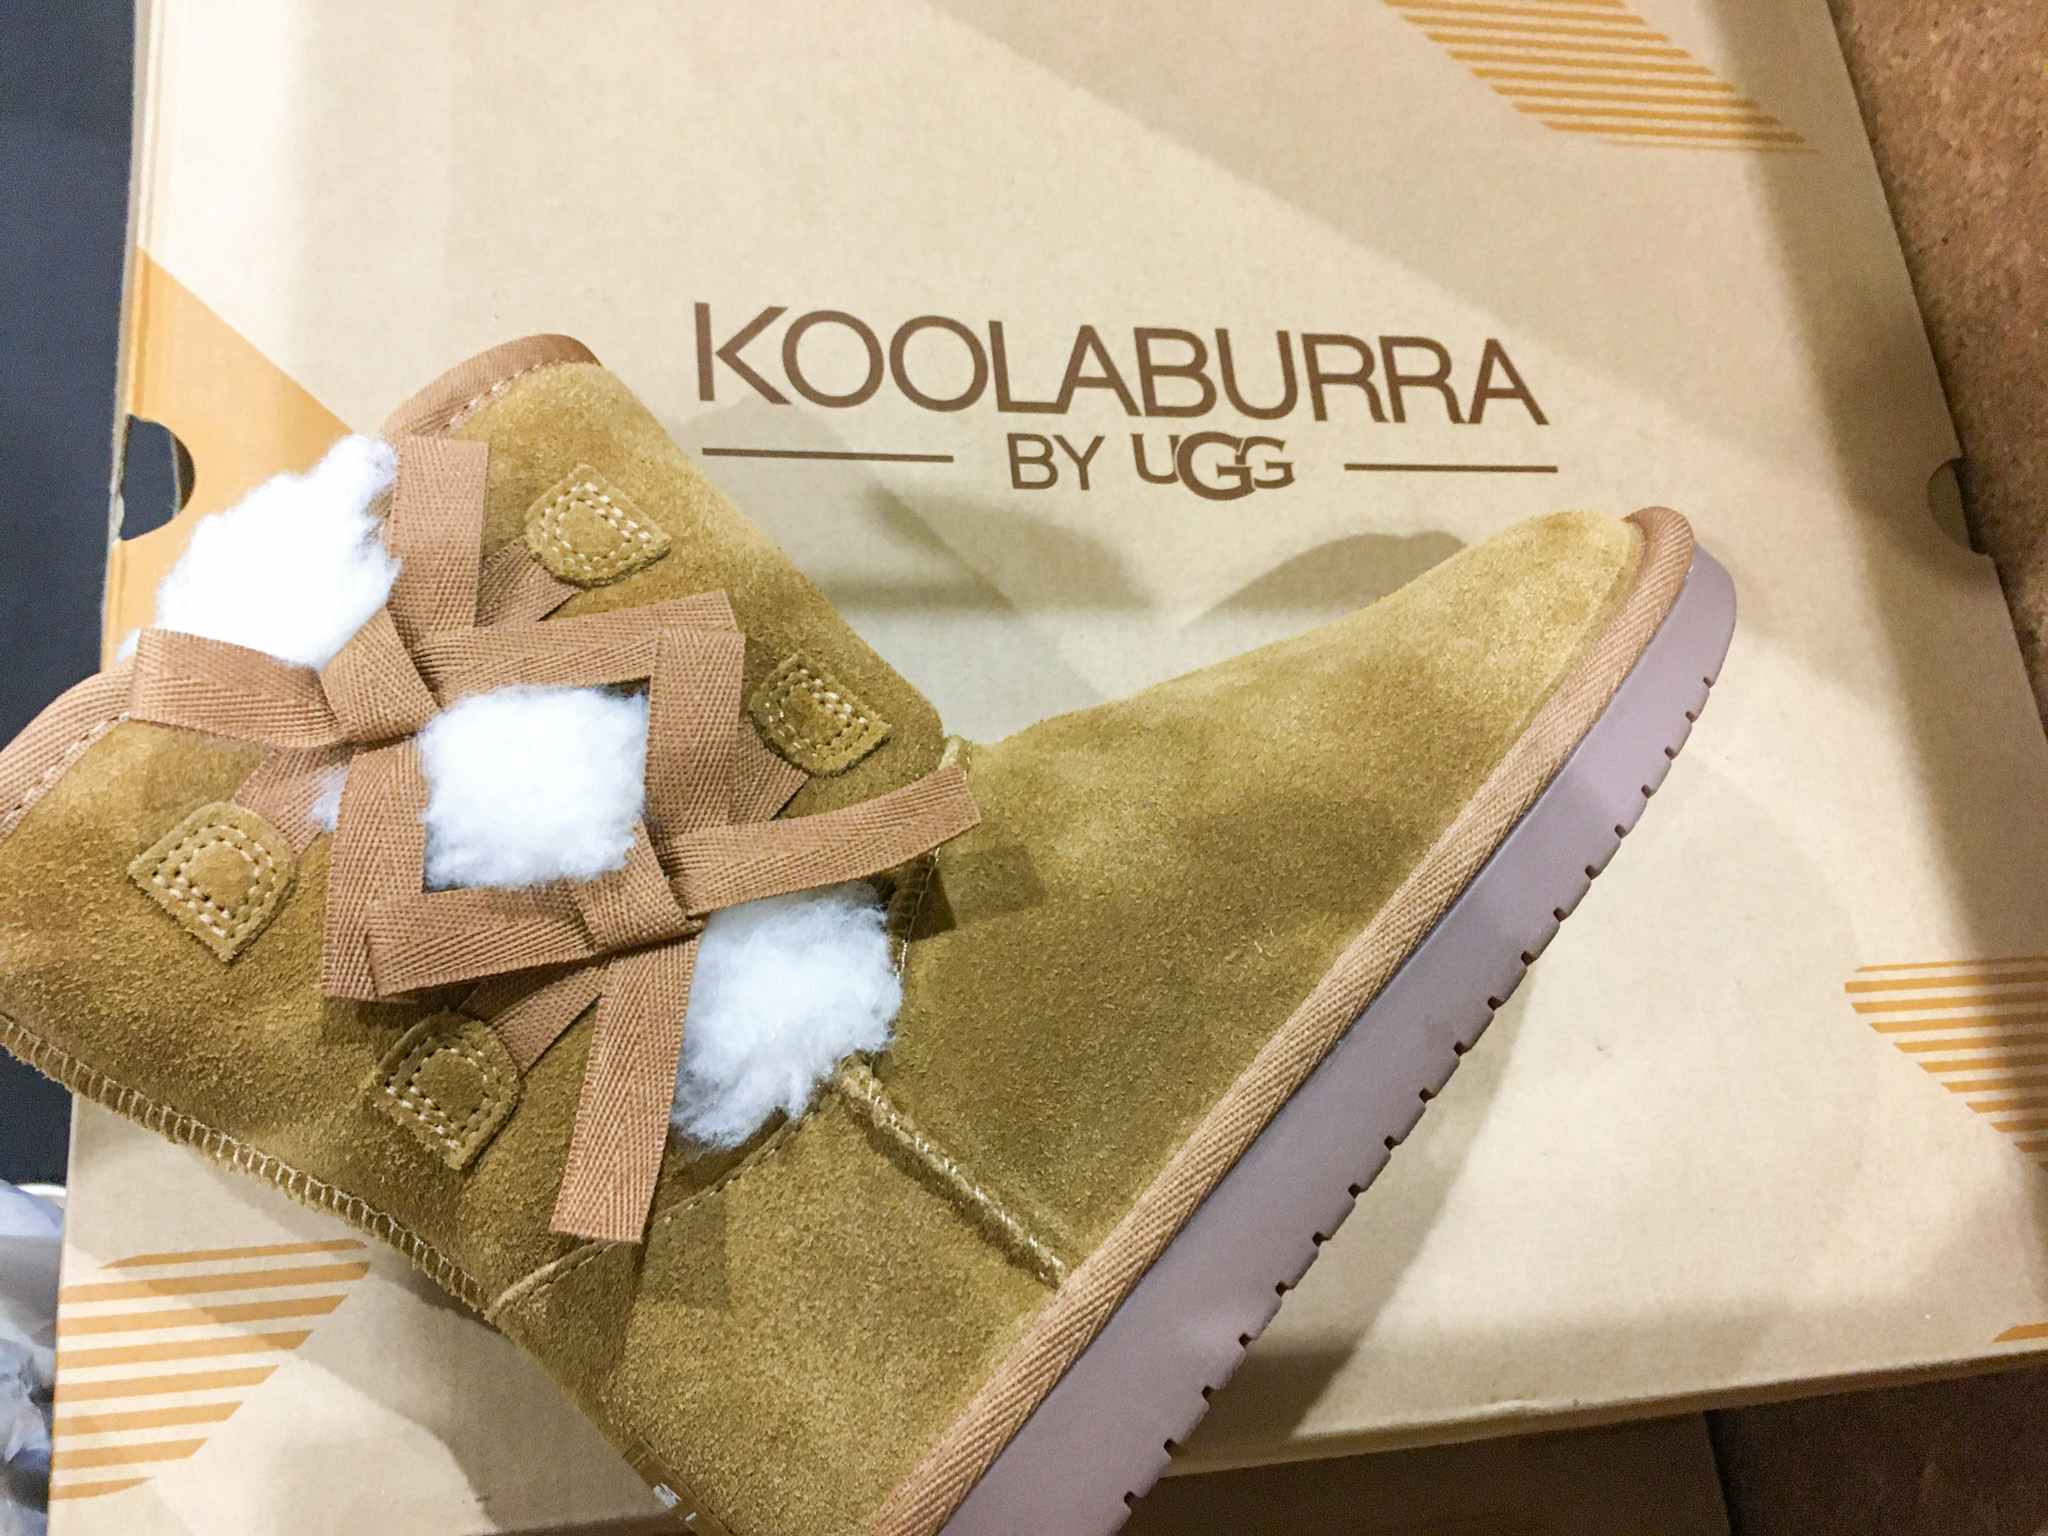 Koolaburra by Ugg Boots, as Low as $33.49 Shipped at QVC